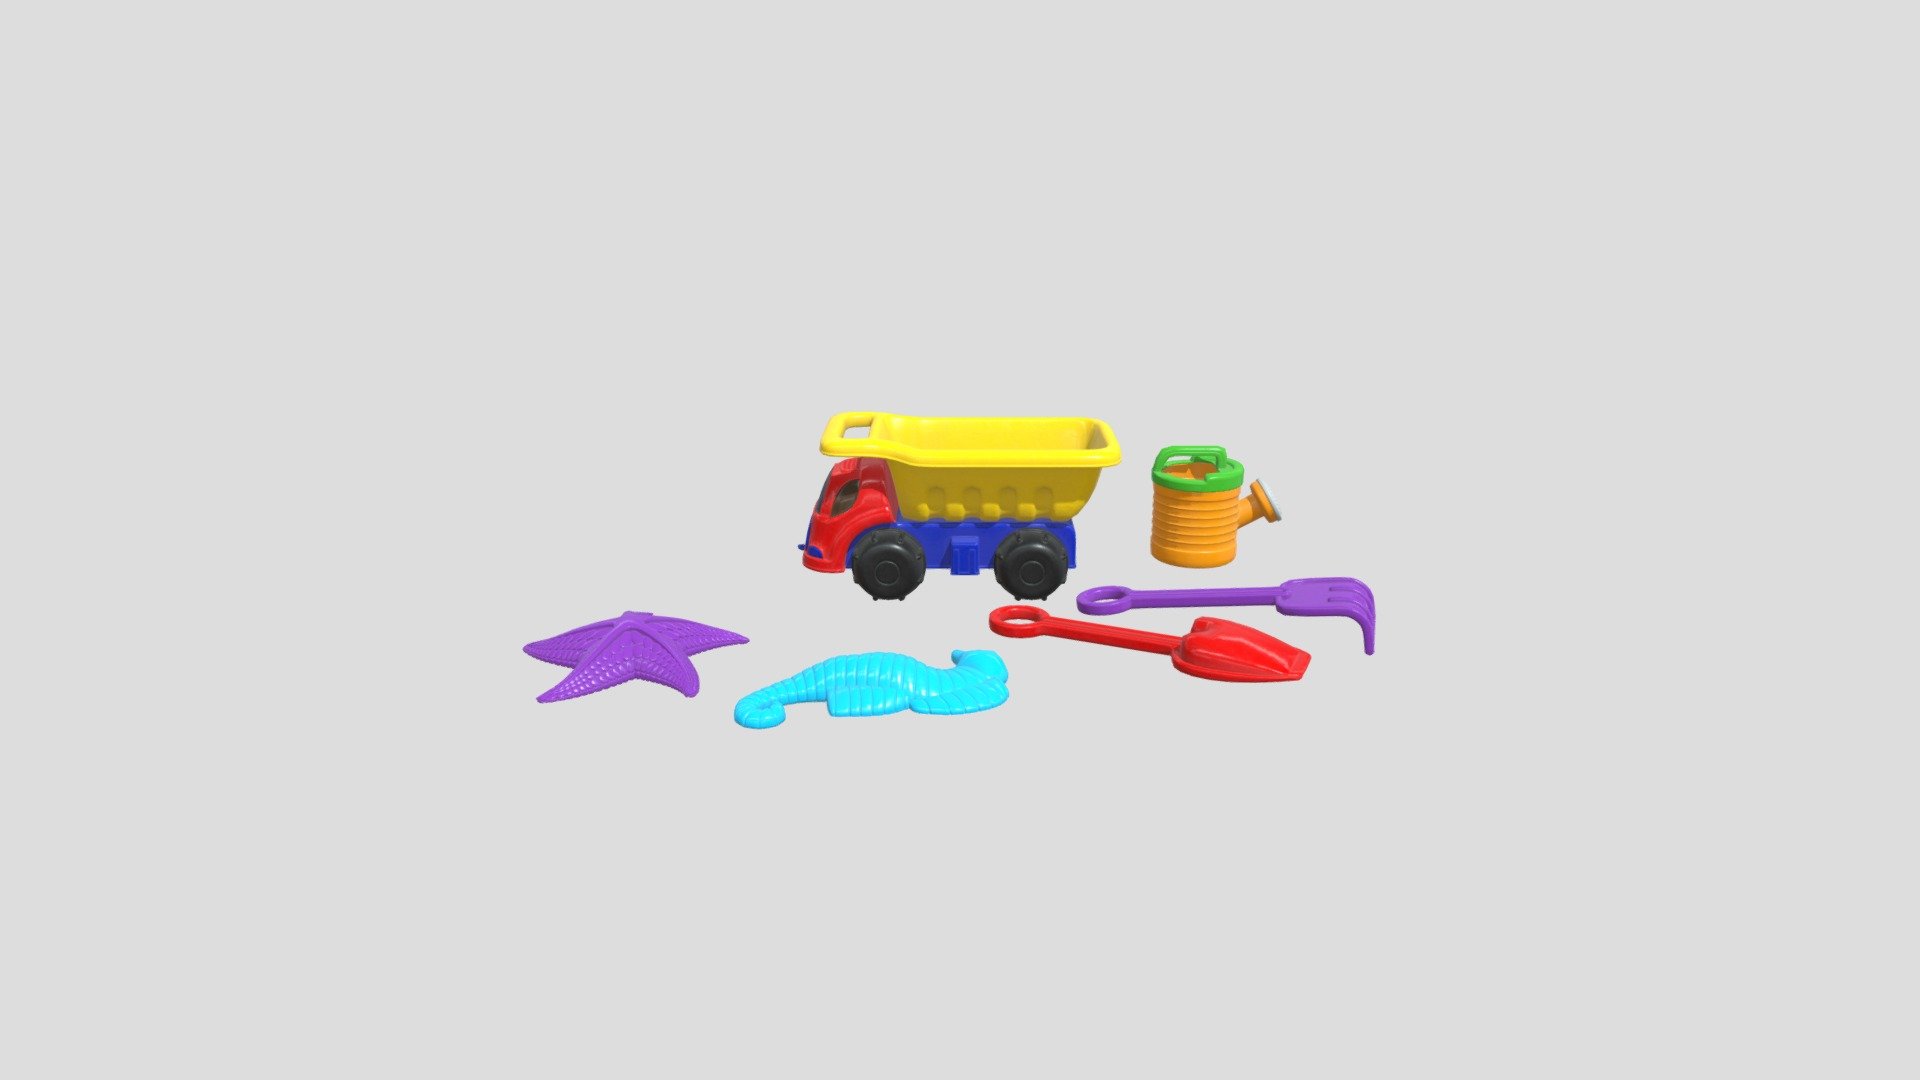 Highly detailed 3d model of toy with all textures, shaders and materials. It is ready to use, just put it into your scene 3d model